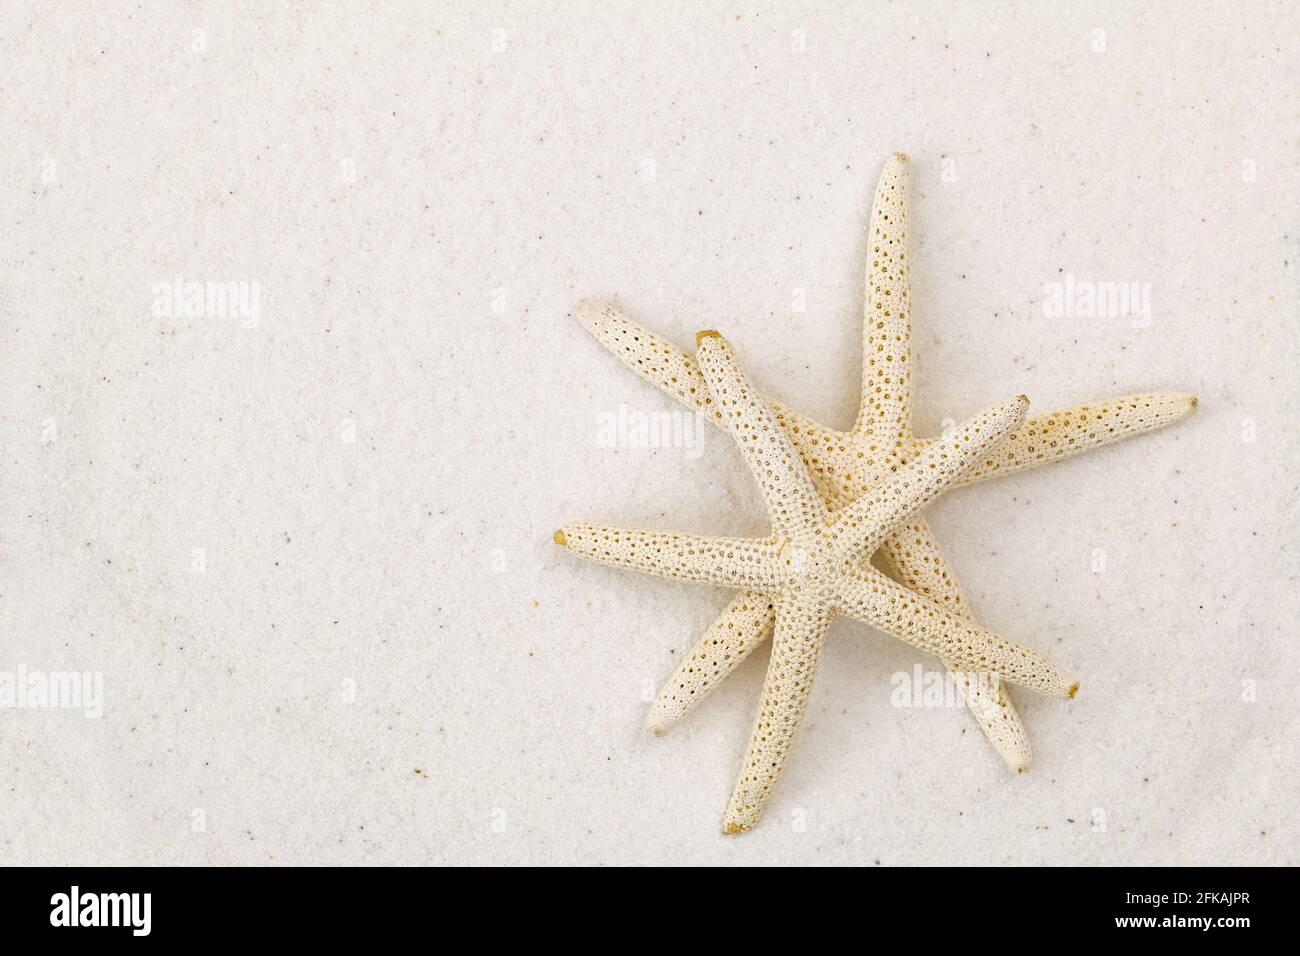 Closeup of two star fish, known as sea stars, on white fine sand beach background with copyspace Stock Photo